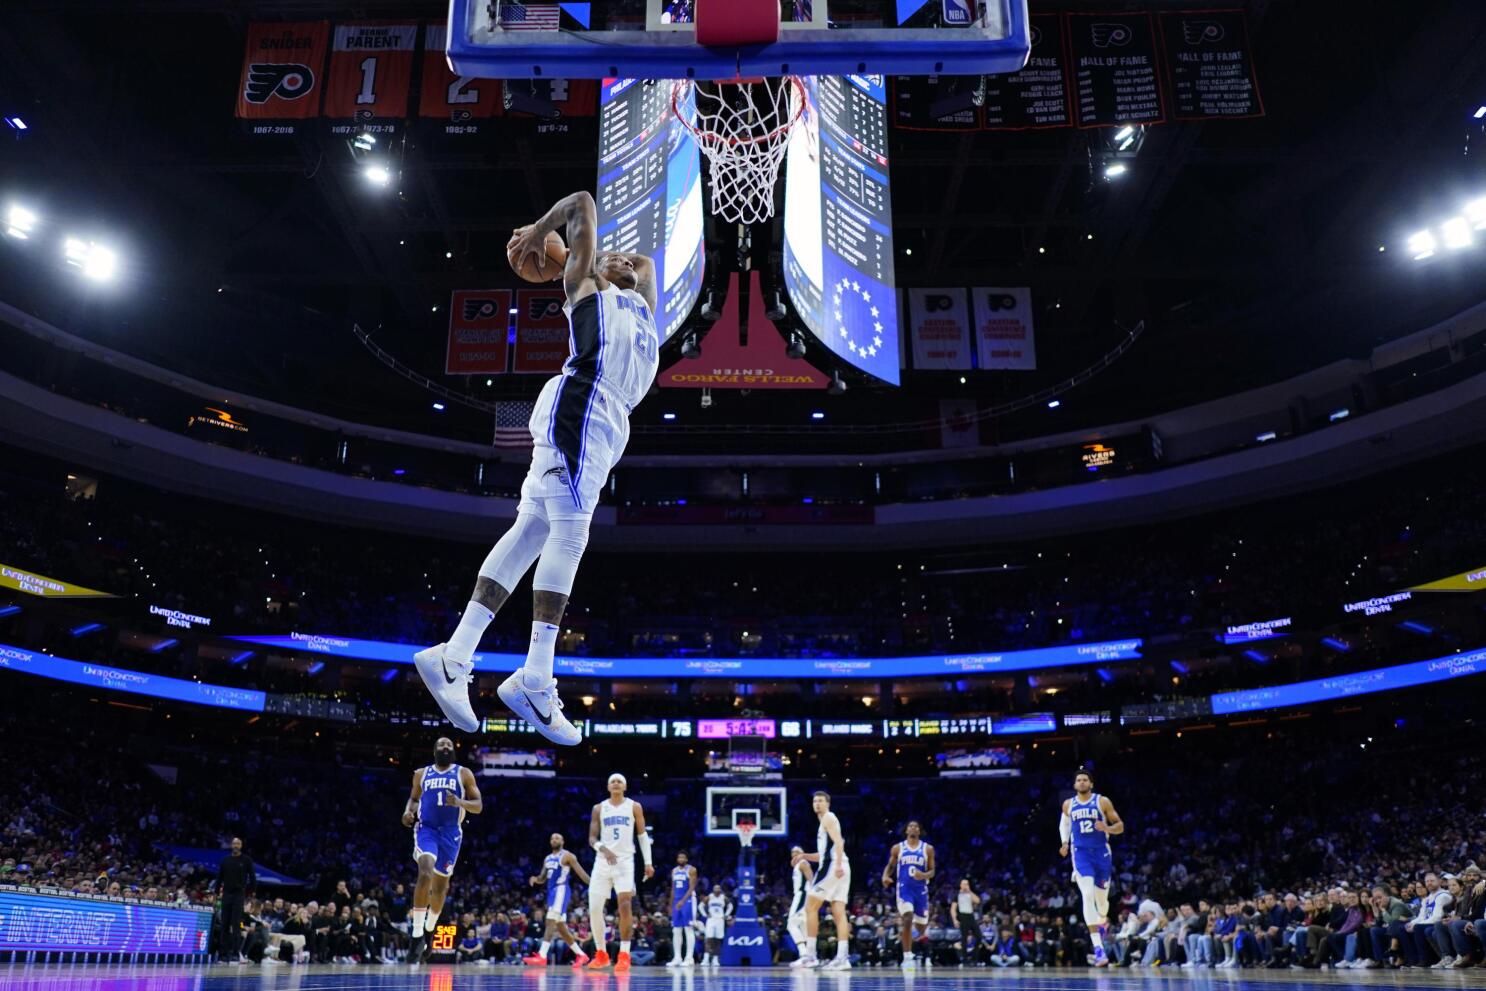 Definitive Dunks: The greatest dunks in Orlando Magic history